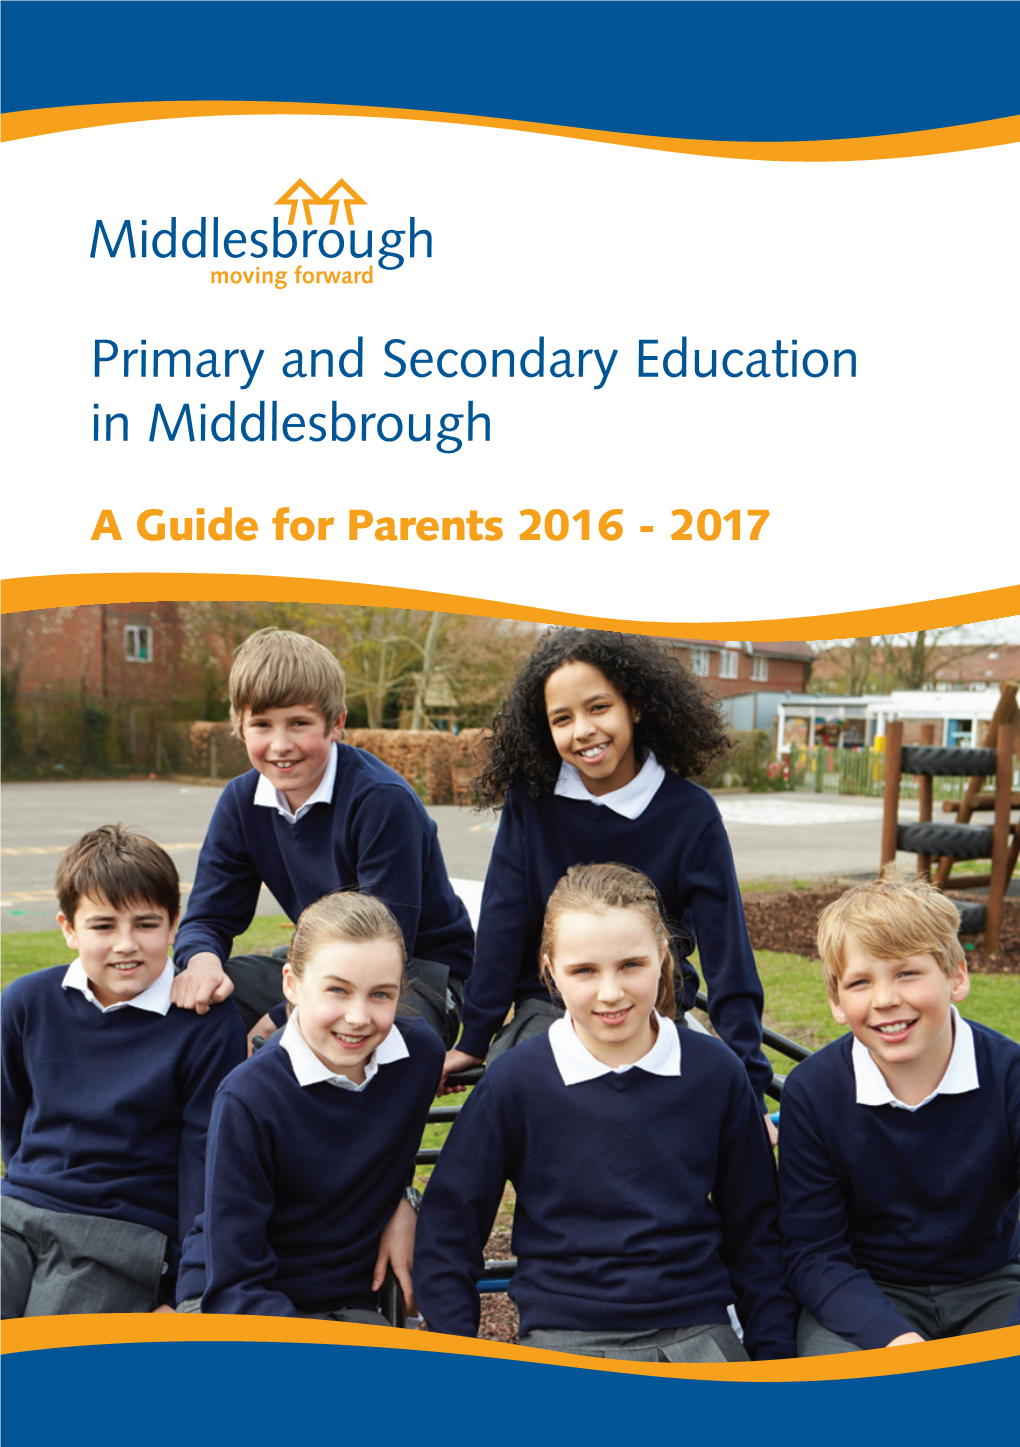 Primary and Secondary Education in Middlesbrough